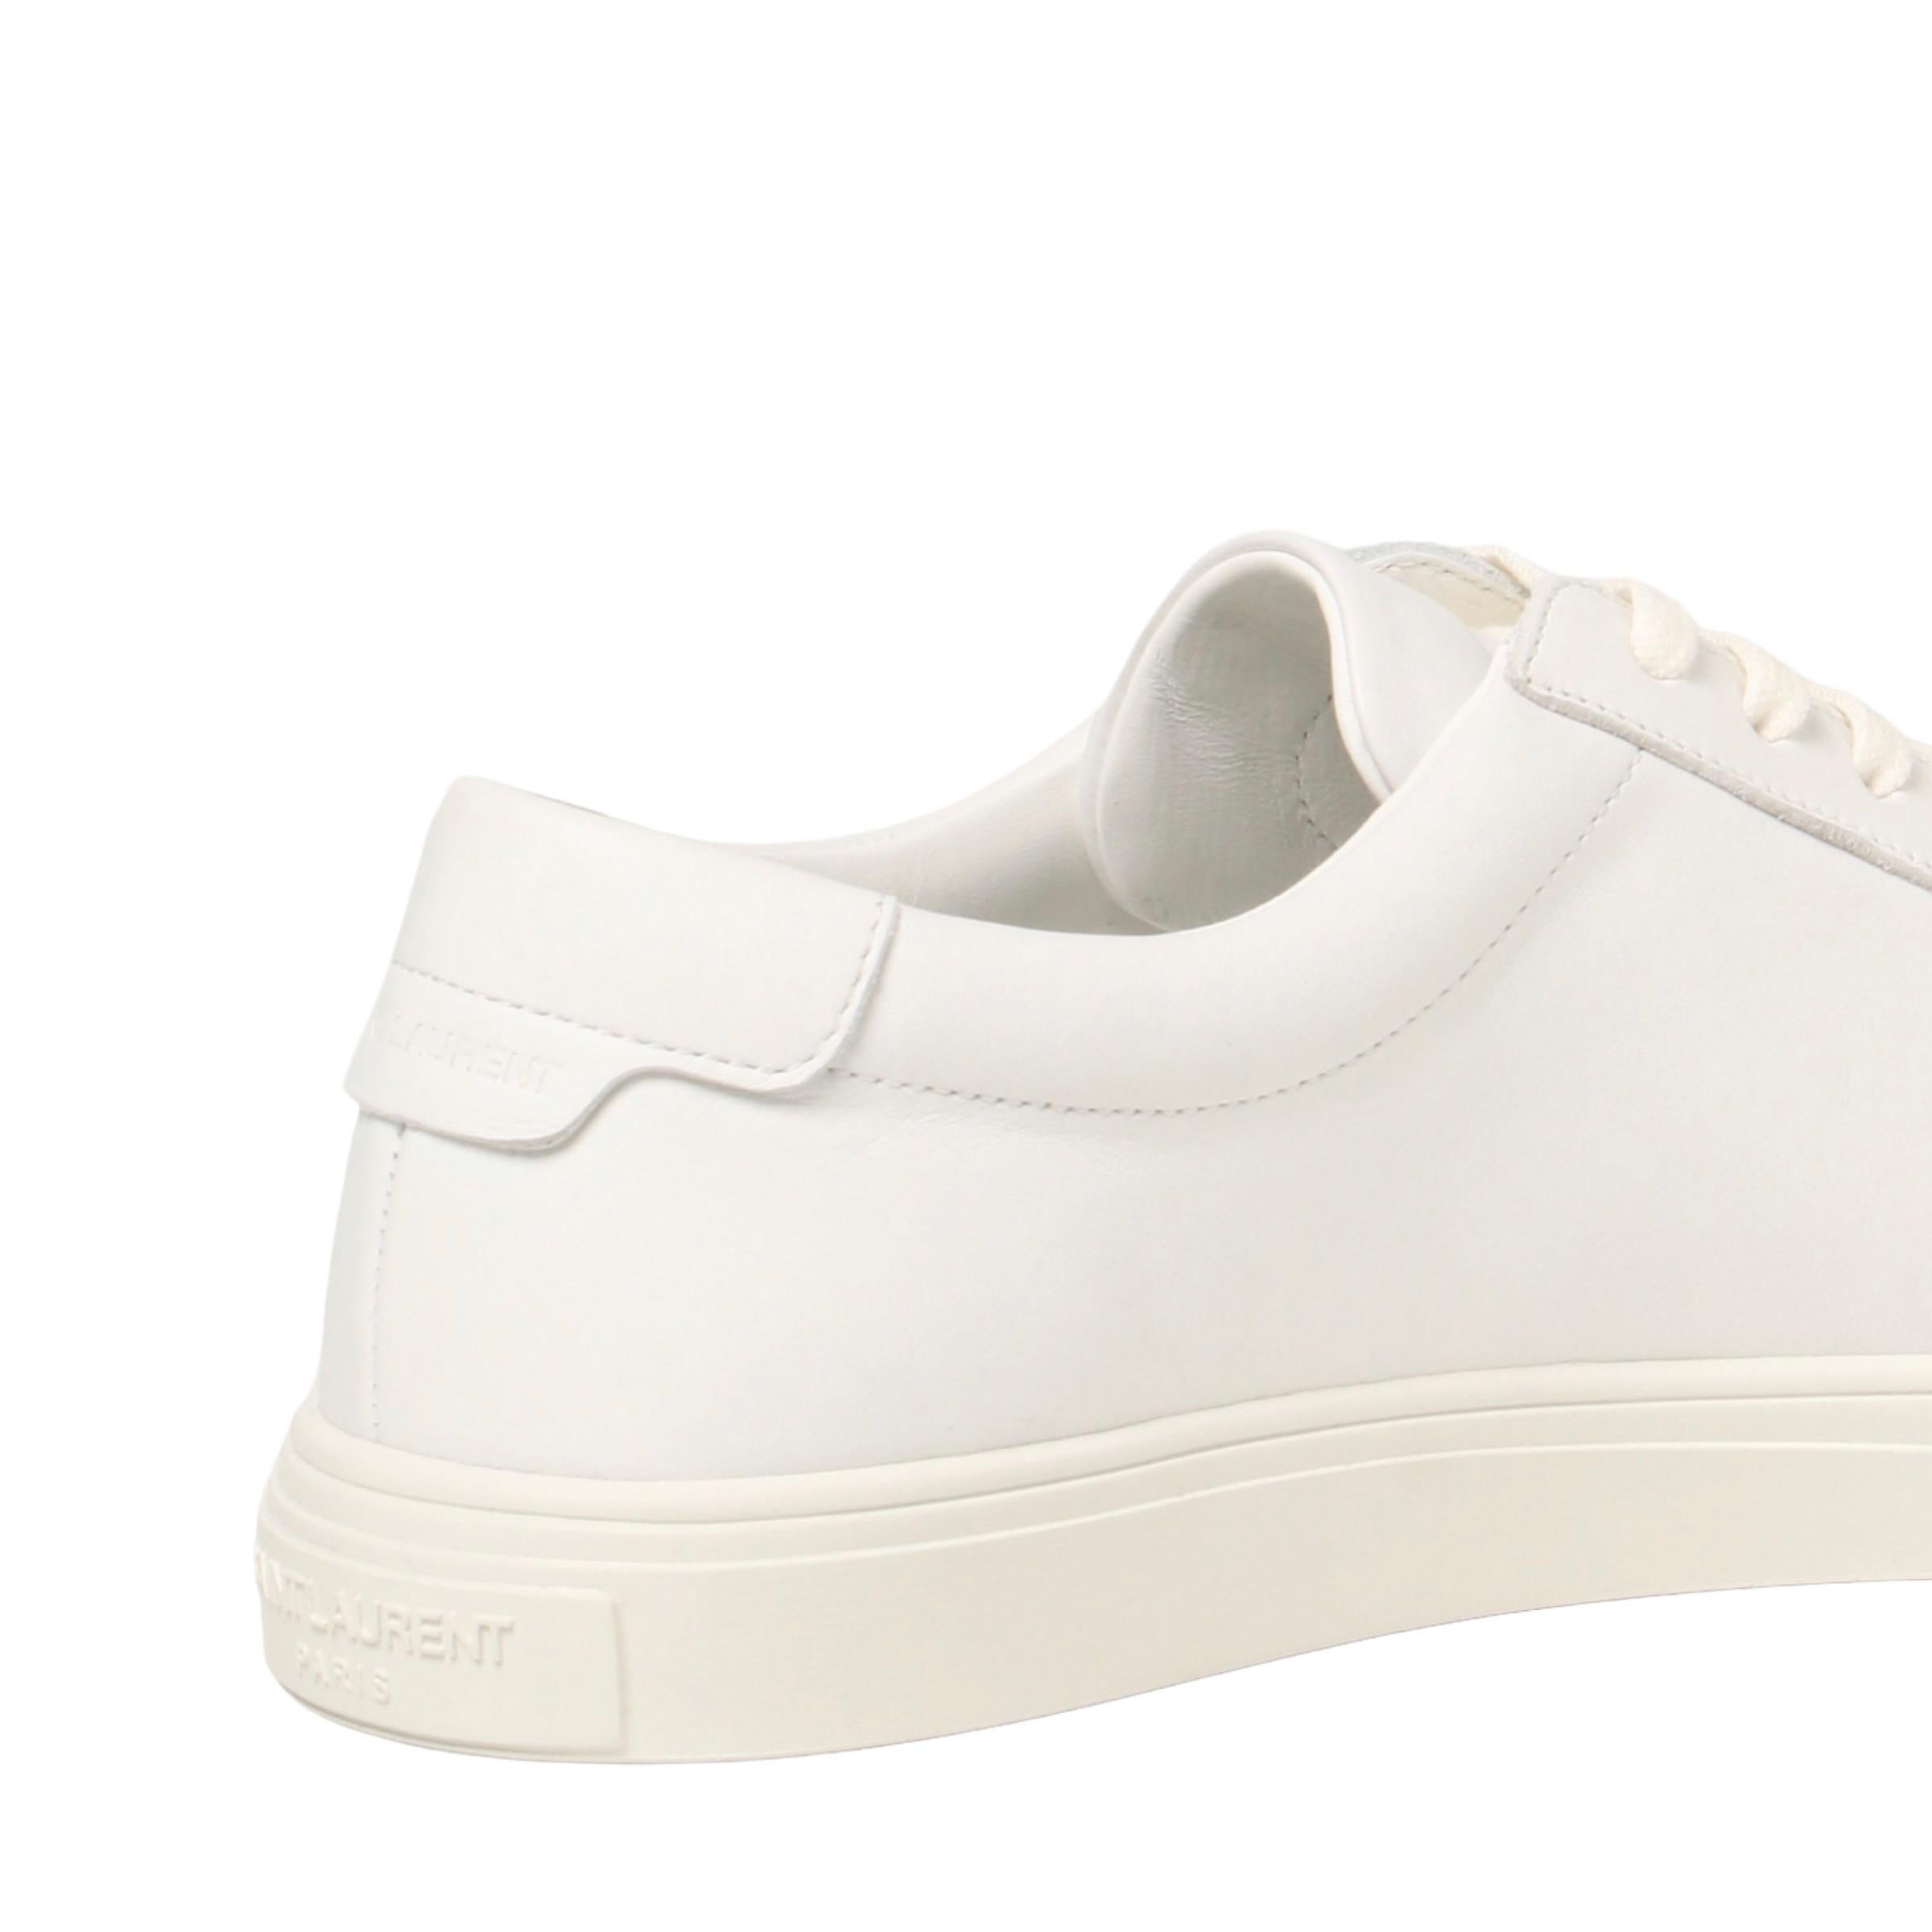 Women's NEW Saint Laurent White Andy Leather Sneakers Size 39.5 EU 9.5 US